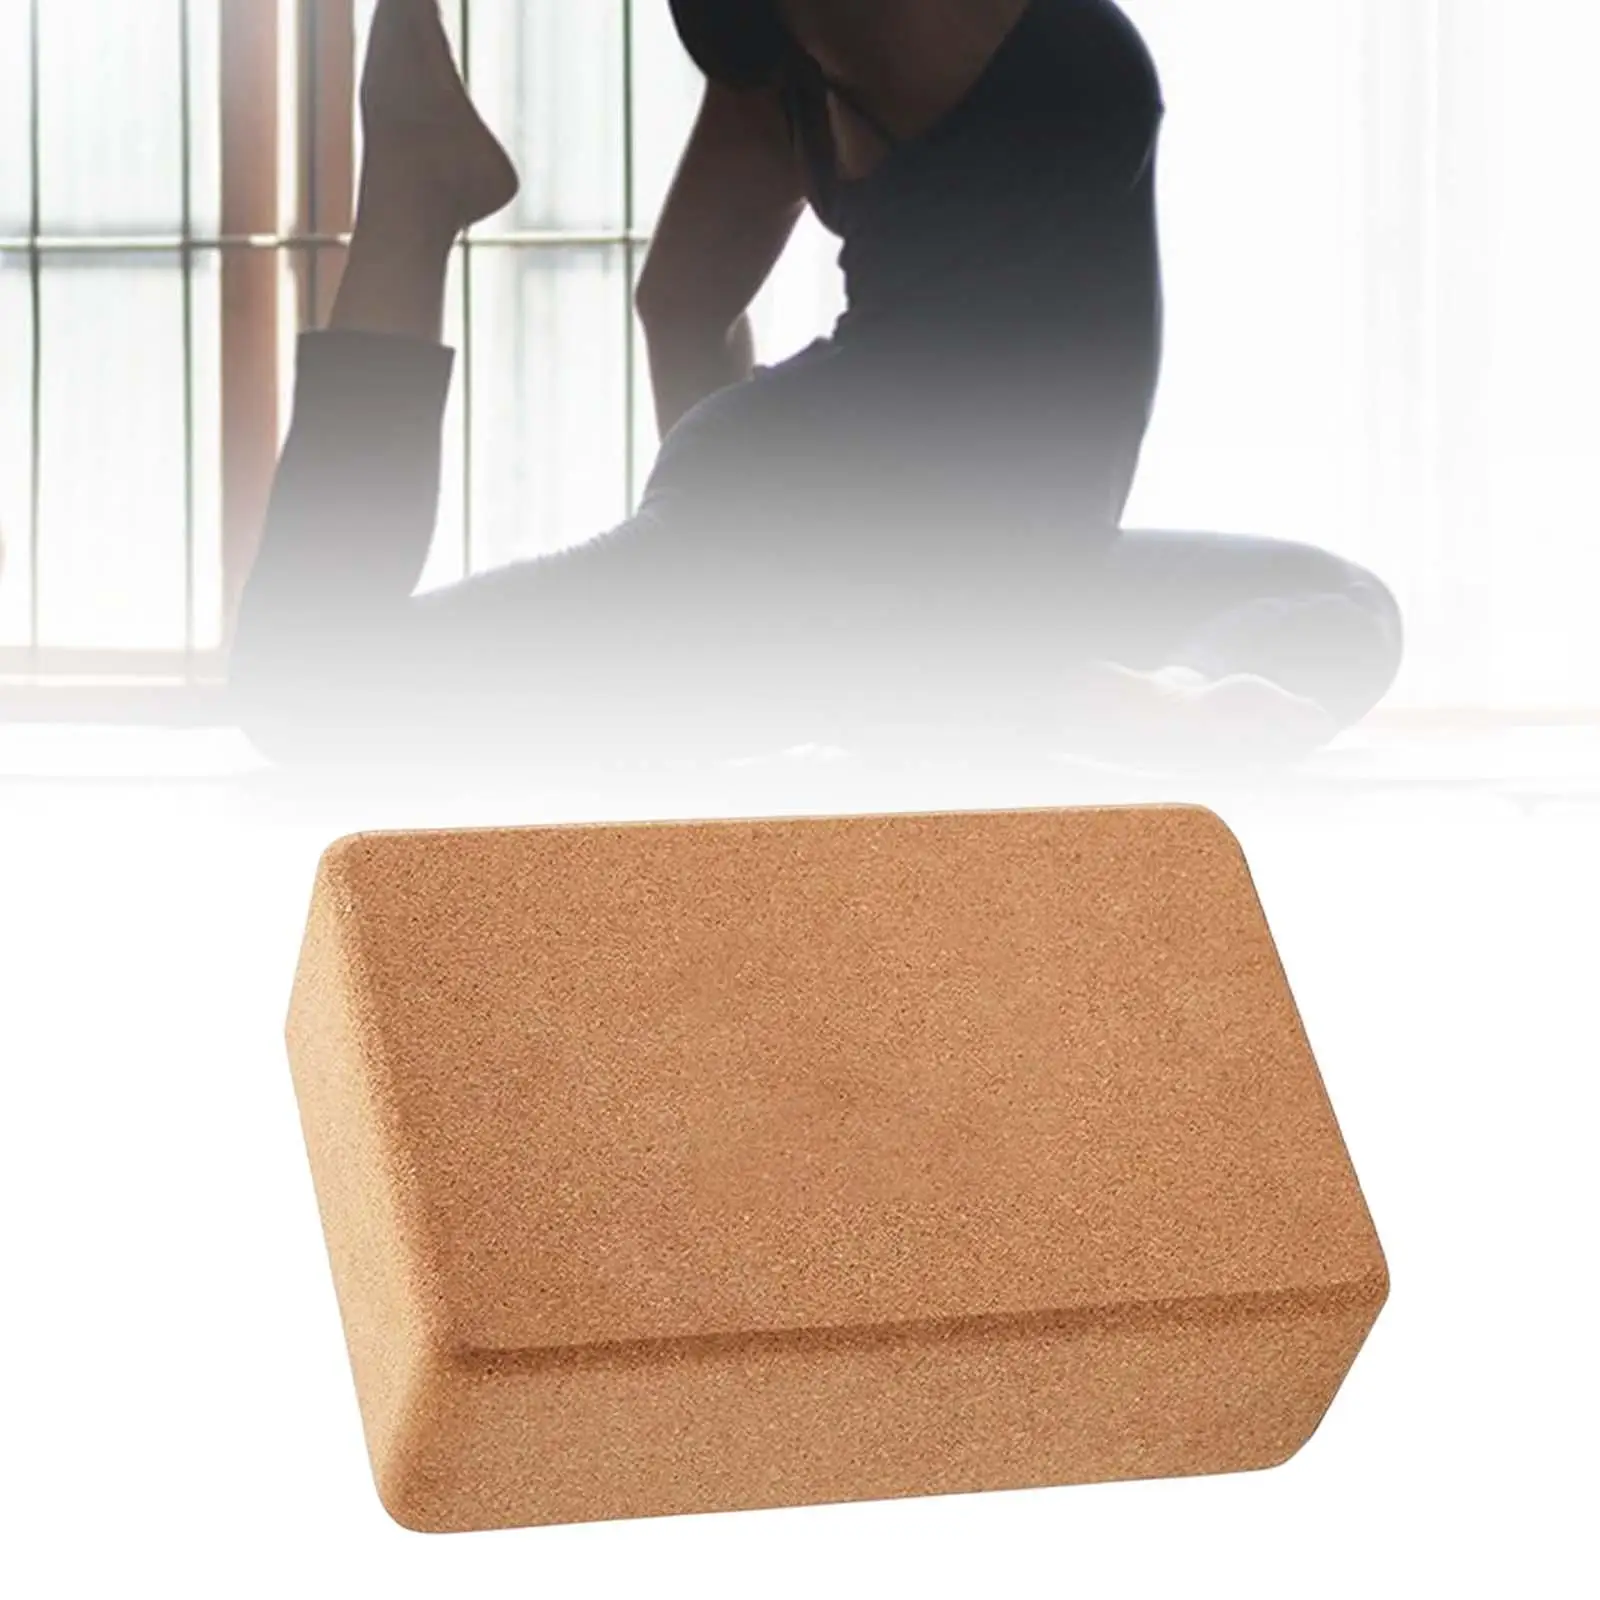 Cork Yoga Block Single Block Pilates Non Slip Meditation Body Building Exercise Brick for Fitness Gym Indoor Sports Workout Home